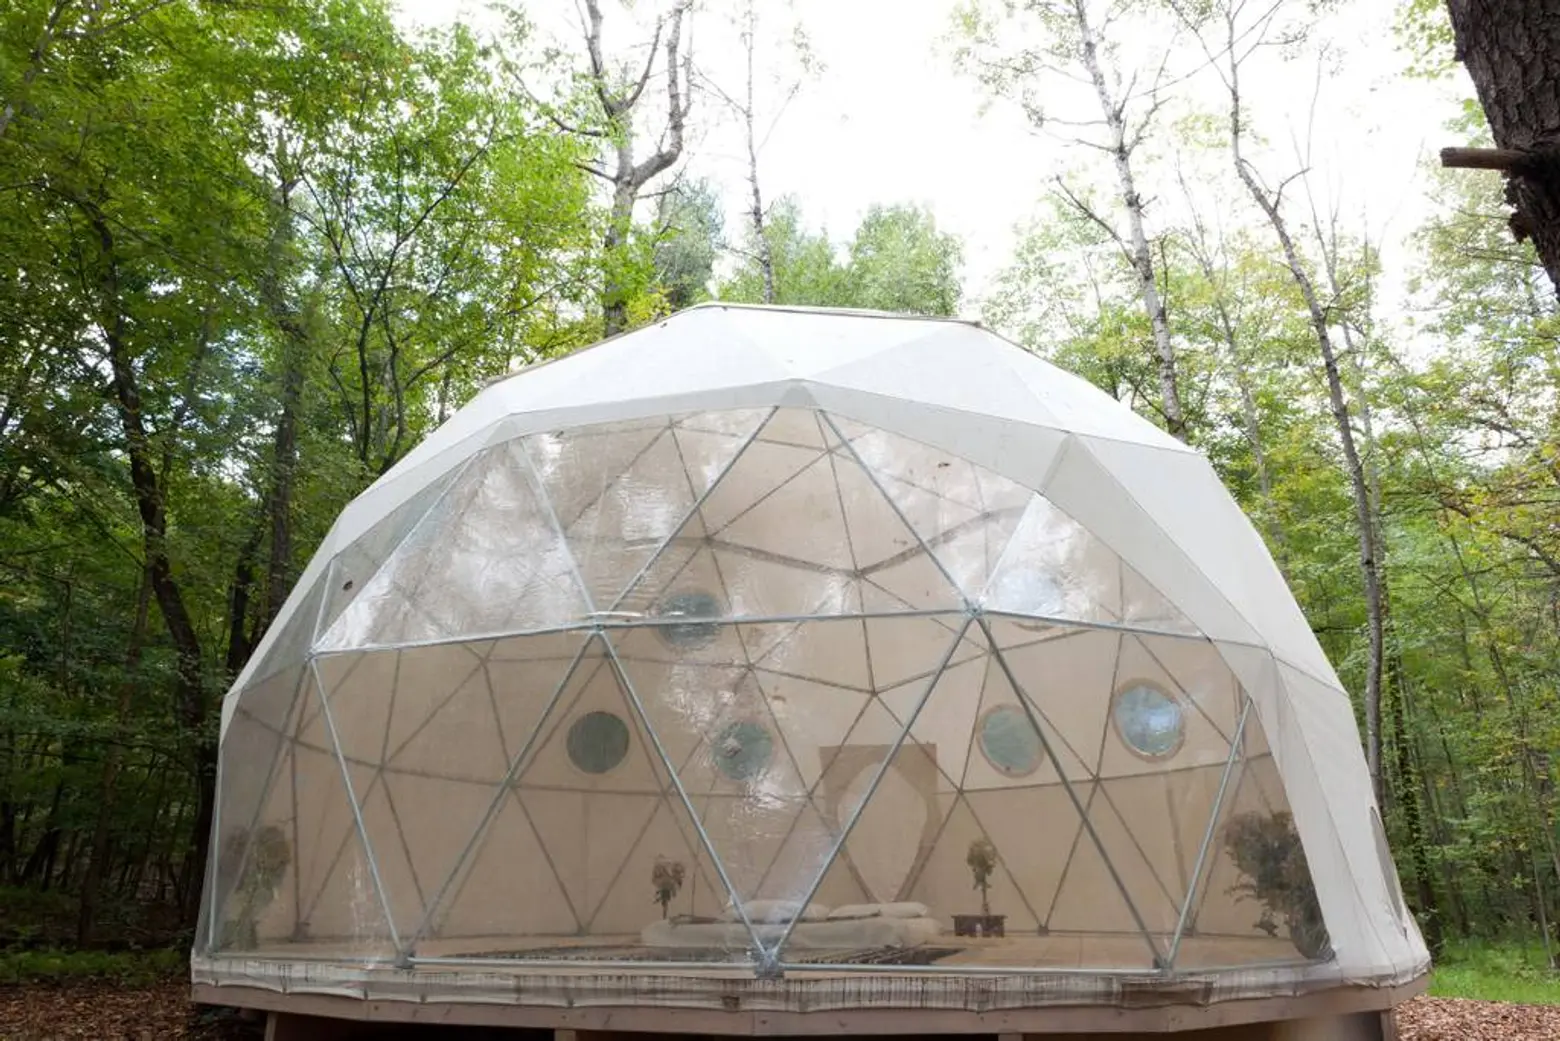 Geo-dome glamping